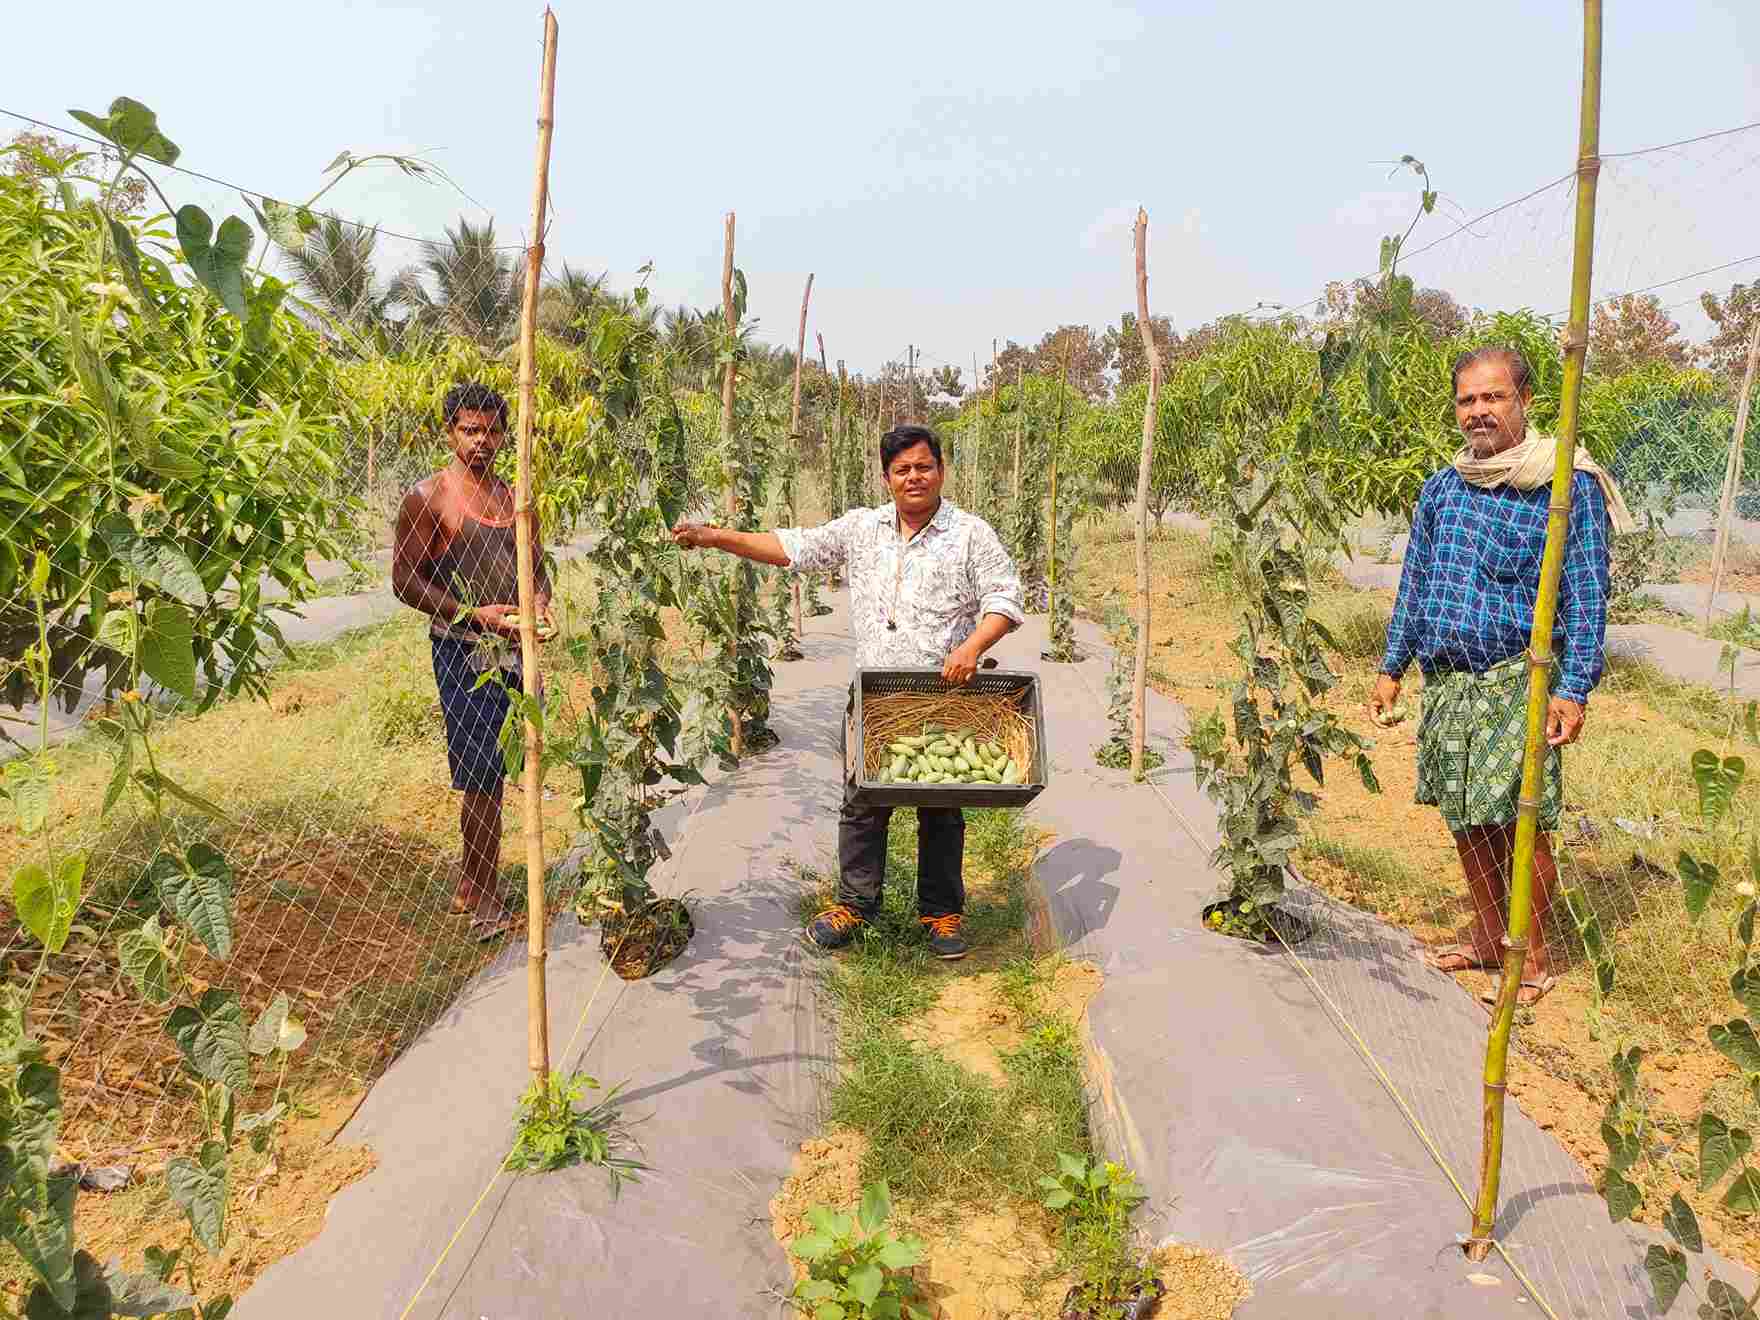 Villa Mart is associated with 3,000 farmers across the villages of Odisha